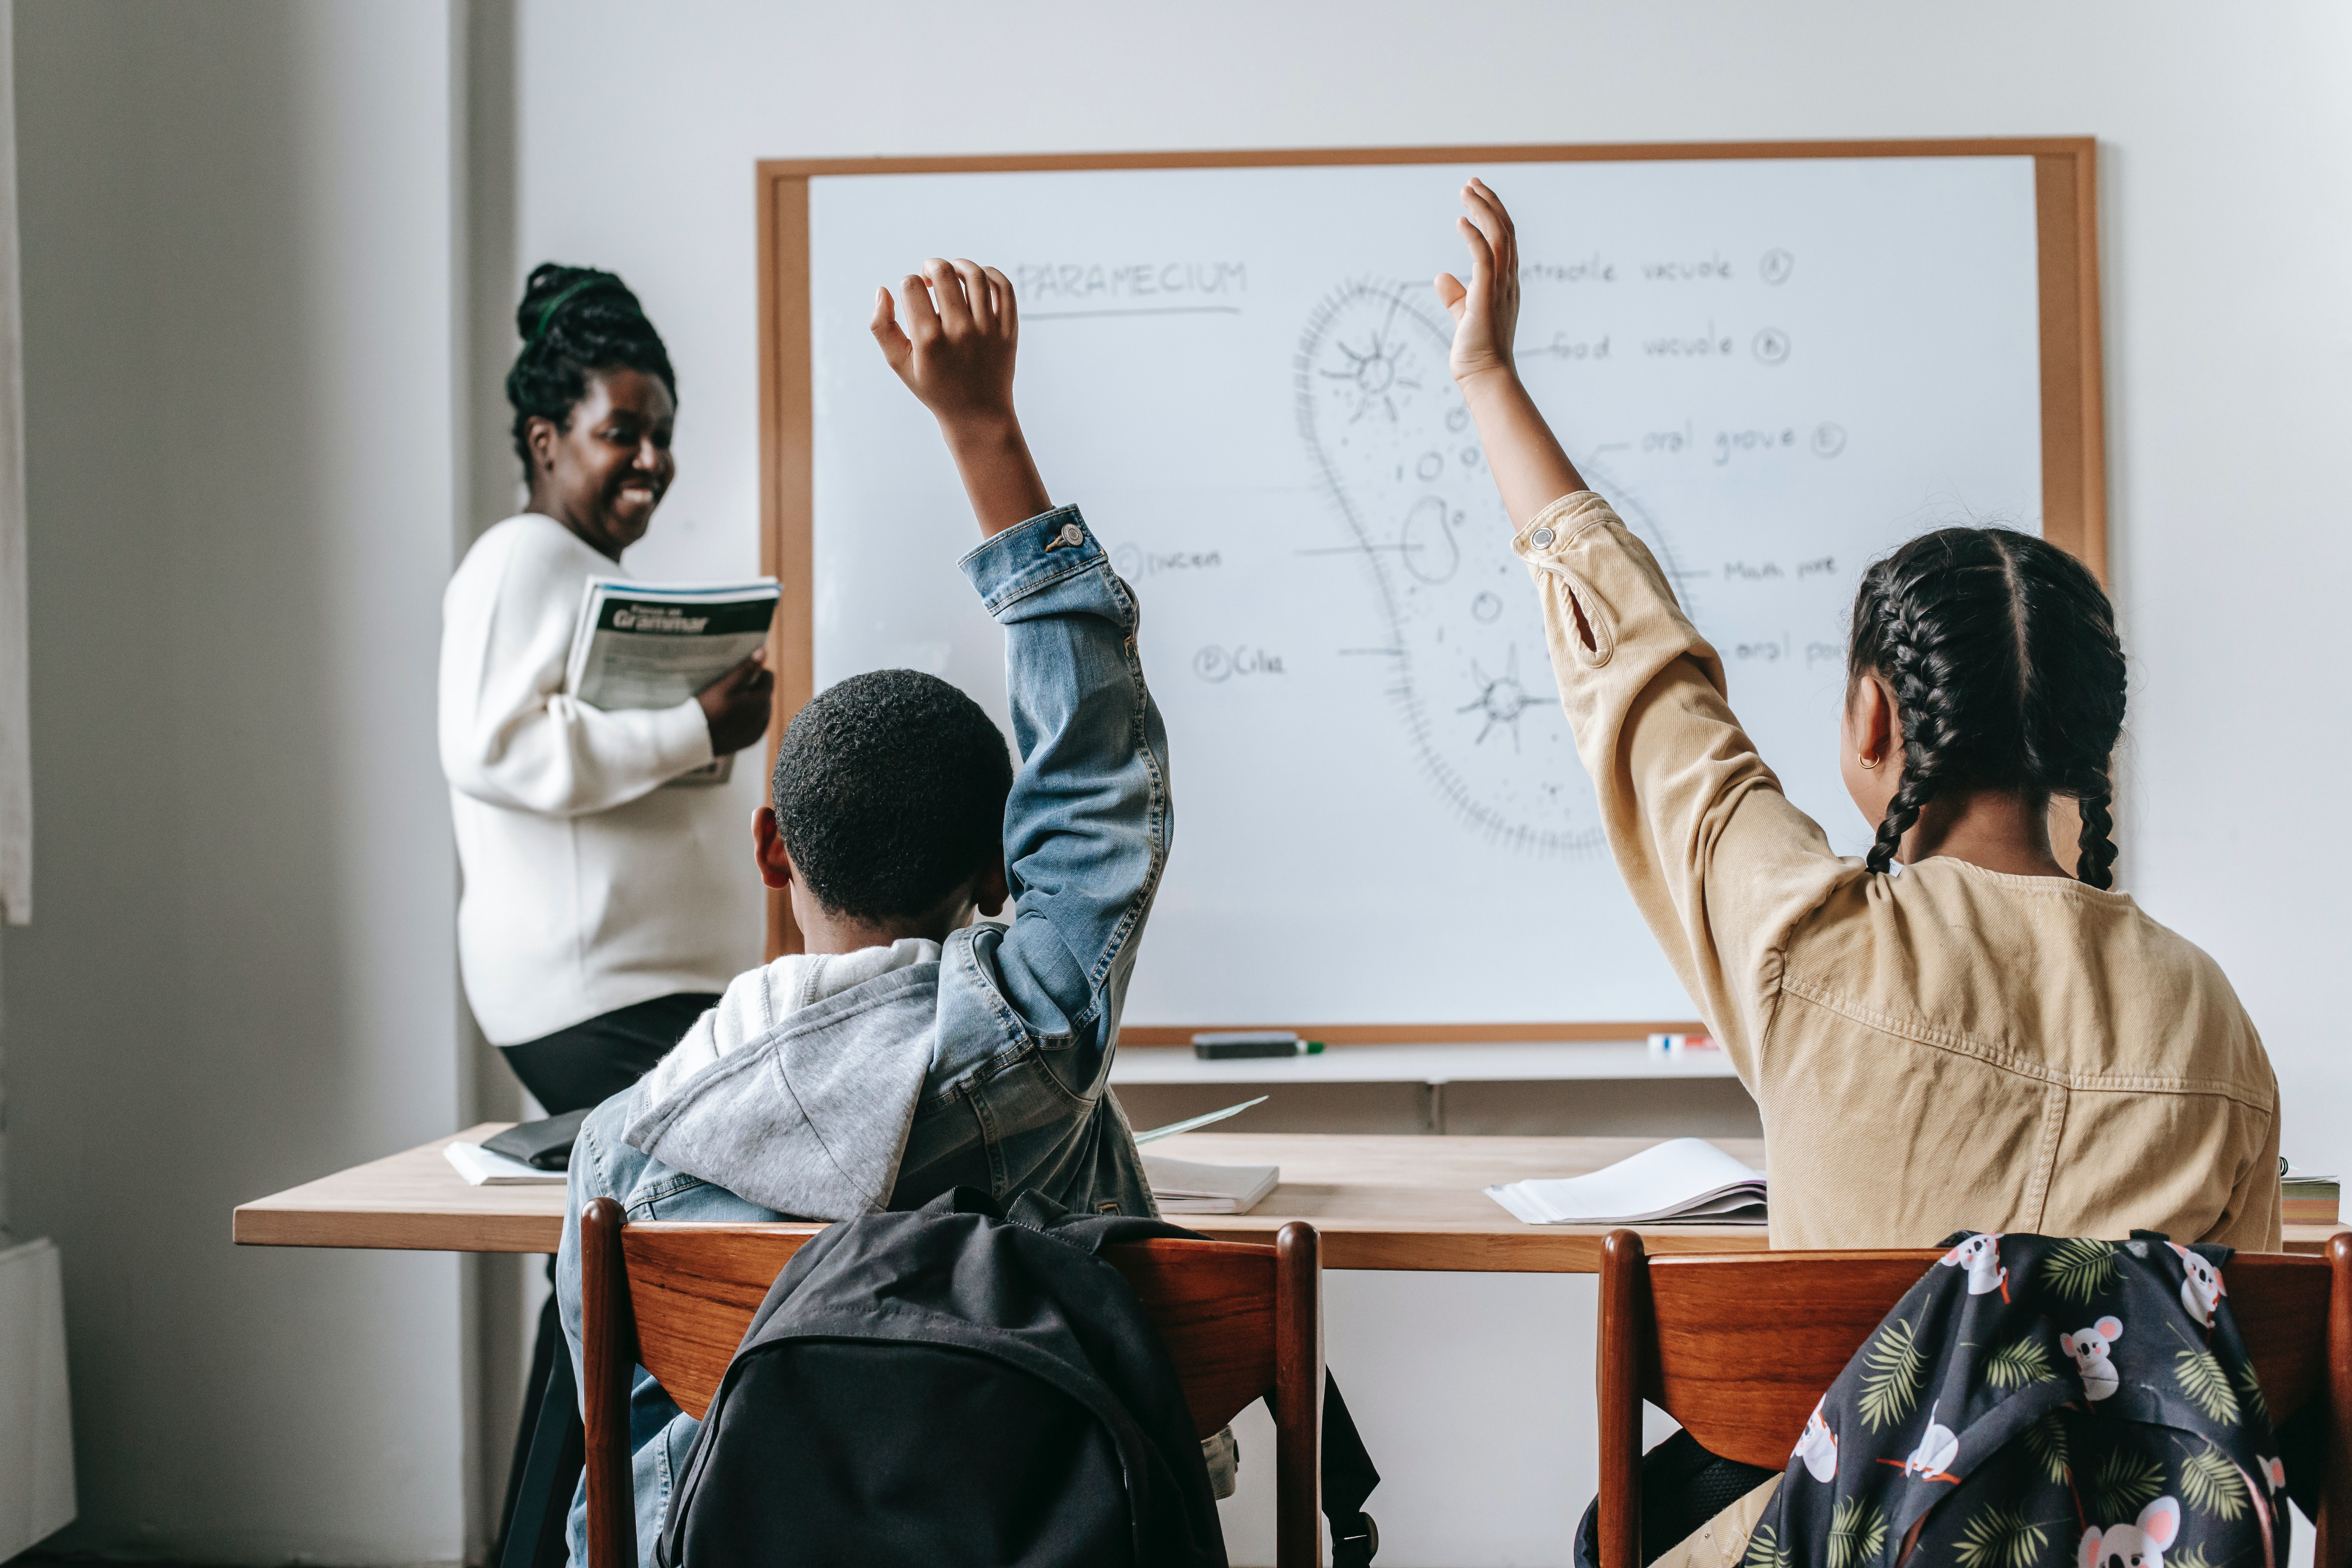 Photo by Katerina Holmes: https://www.pexels.com/photo/black-woman-with-pupils-in-classroom-5905557/